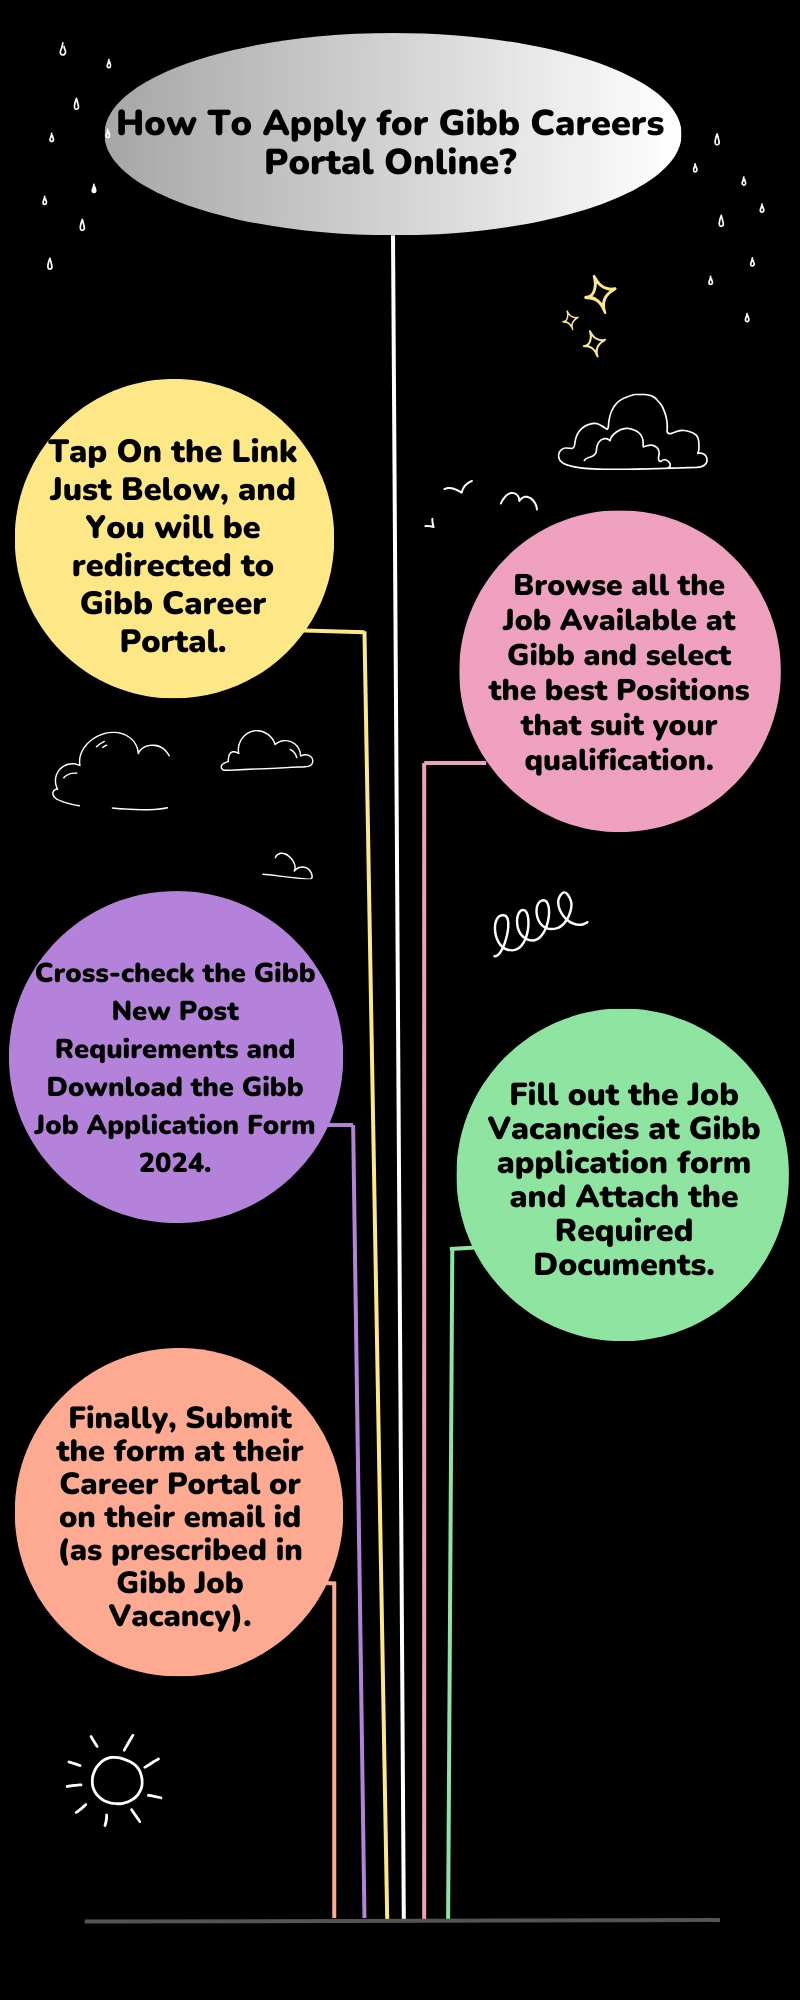 How To Apply for Gibb Careers Portal Online?